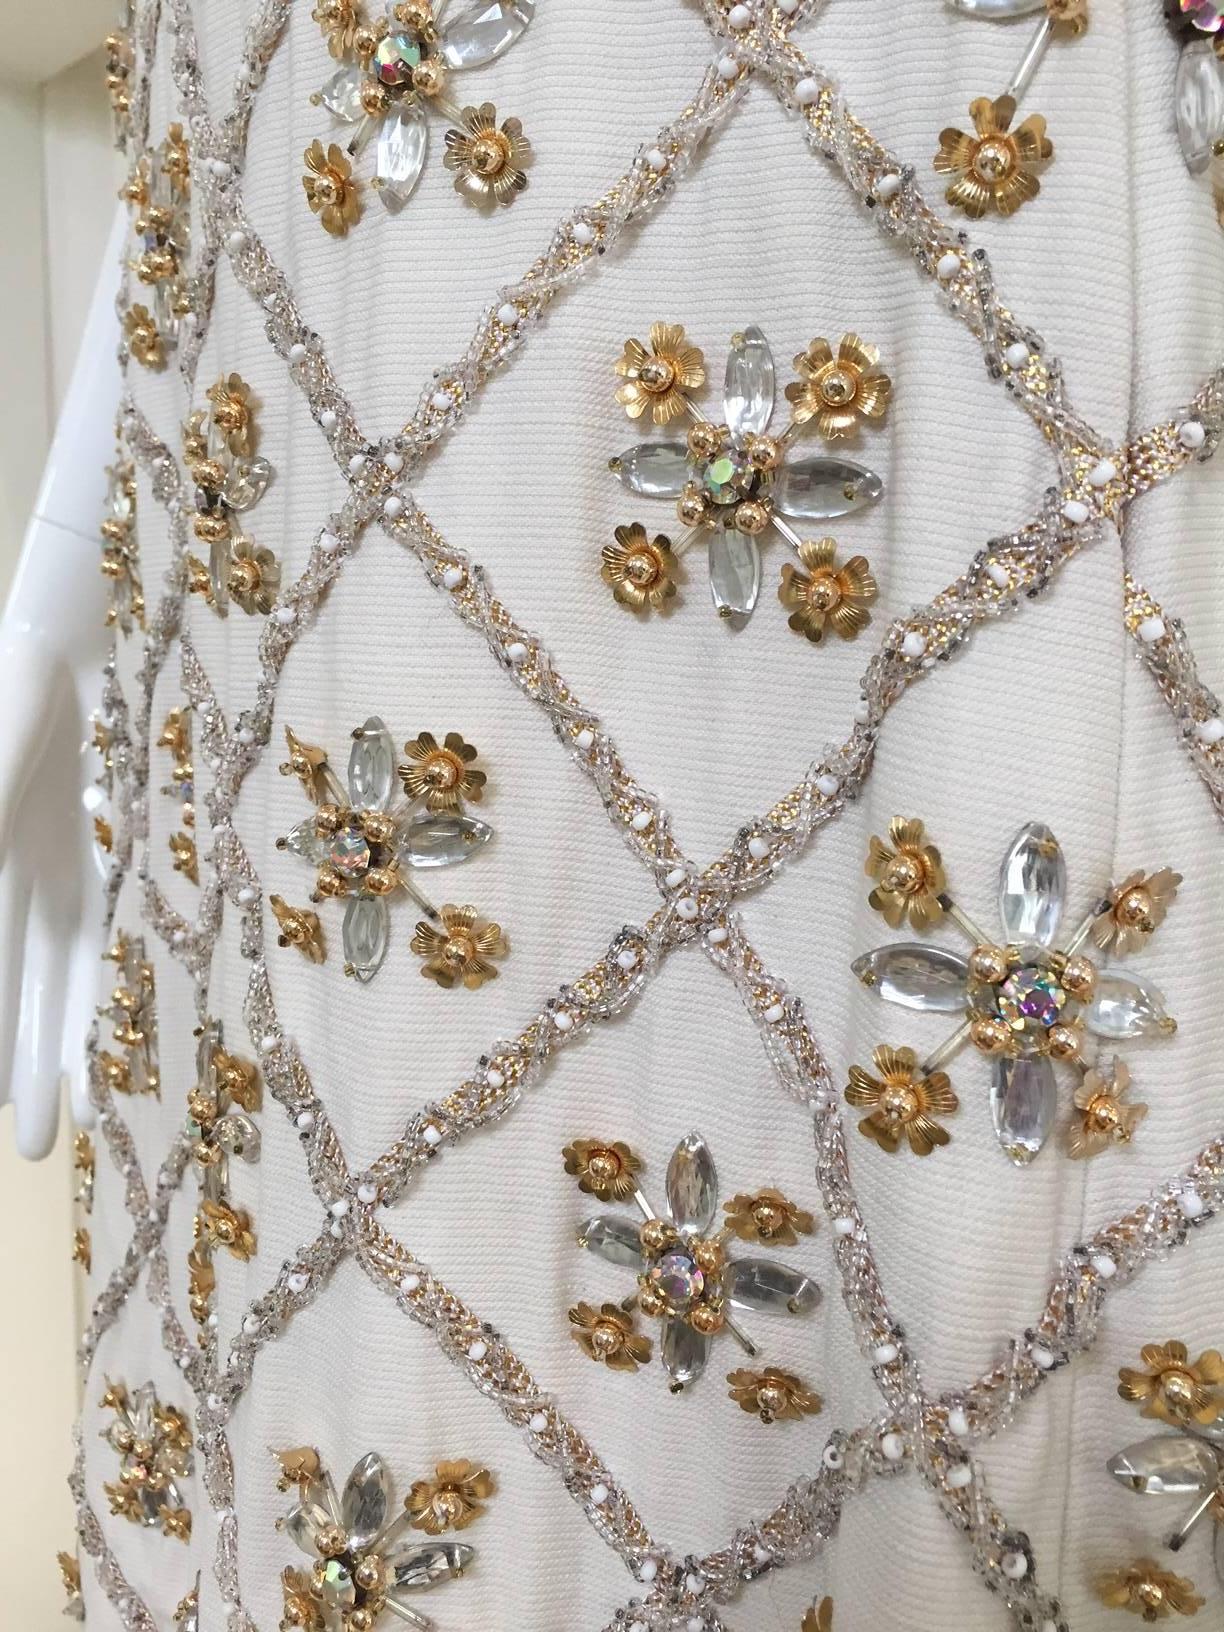 1960s Malcolm Starr off white encrusted glass rhinestones cocktail dress.
Dress has pockets.
Bust: 31